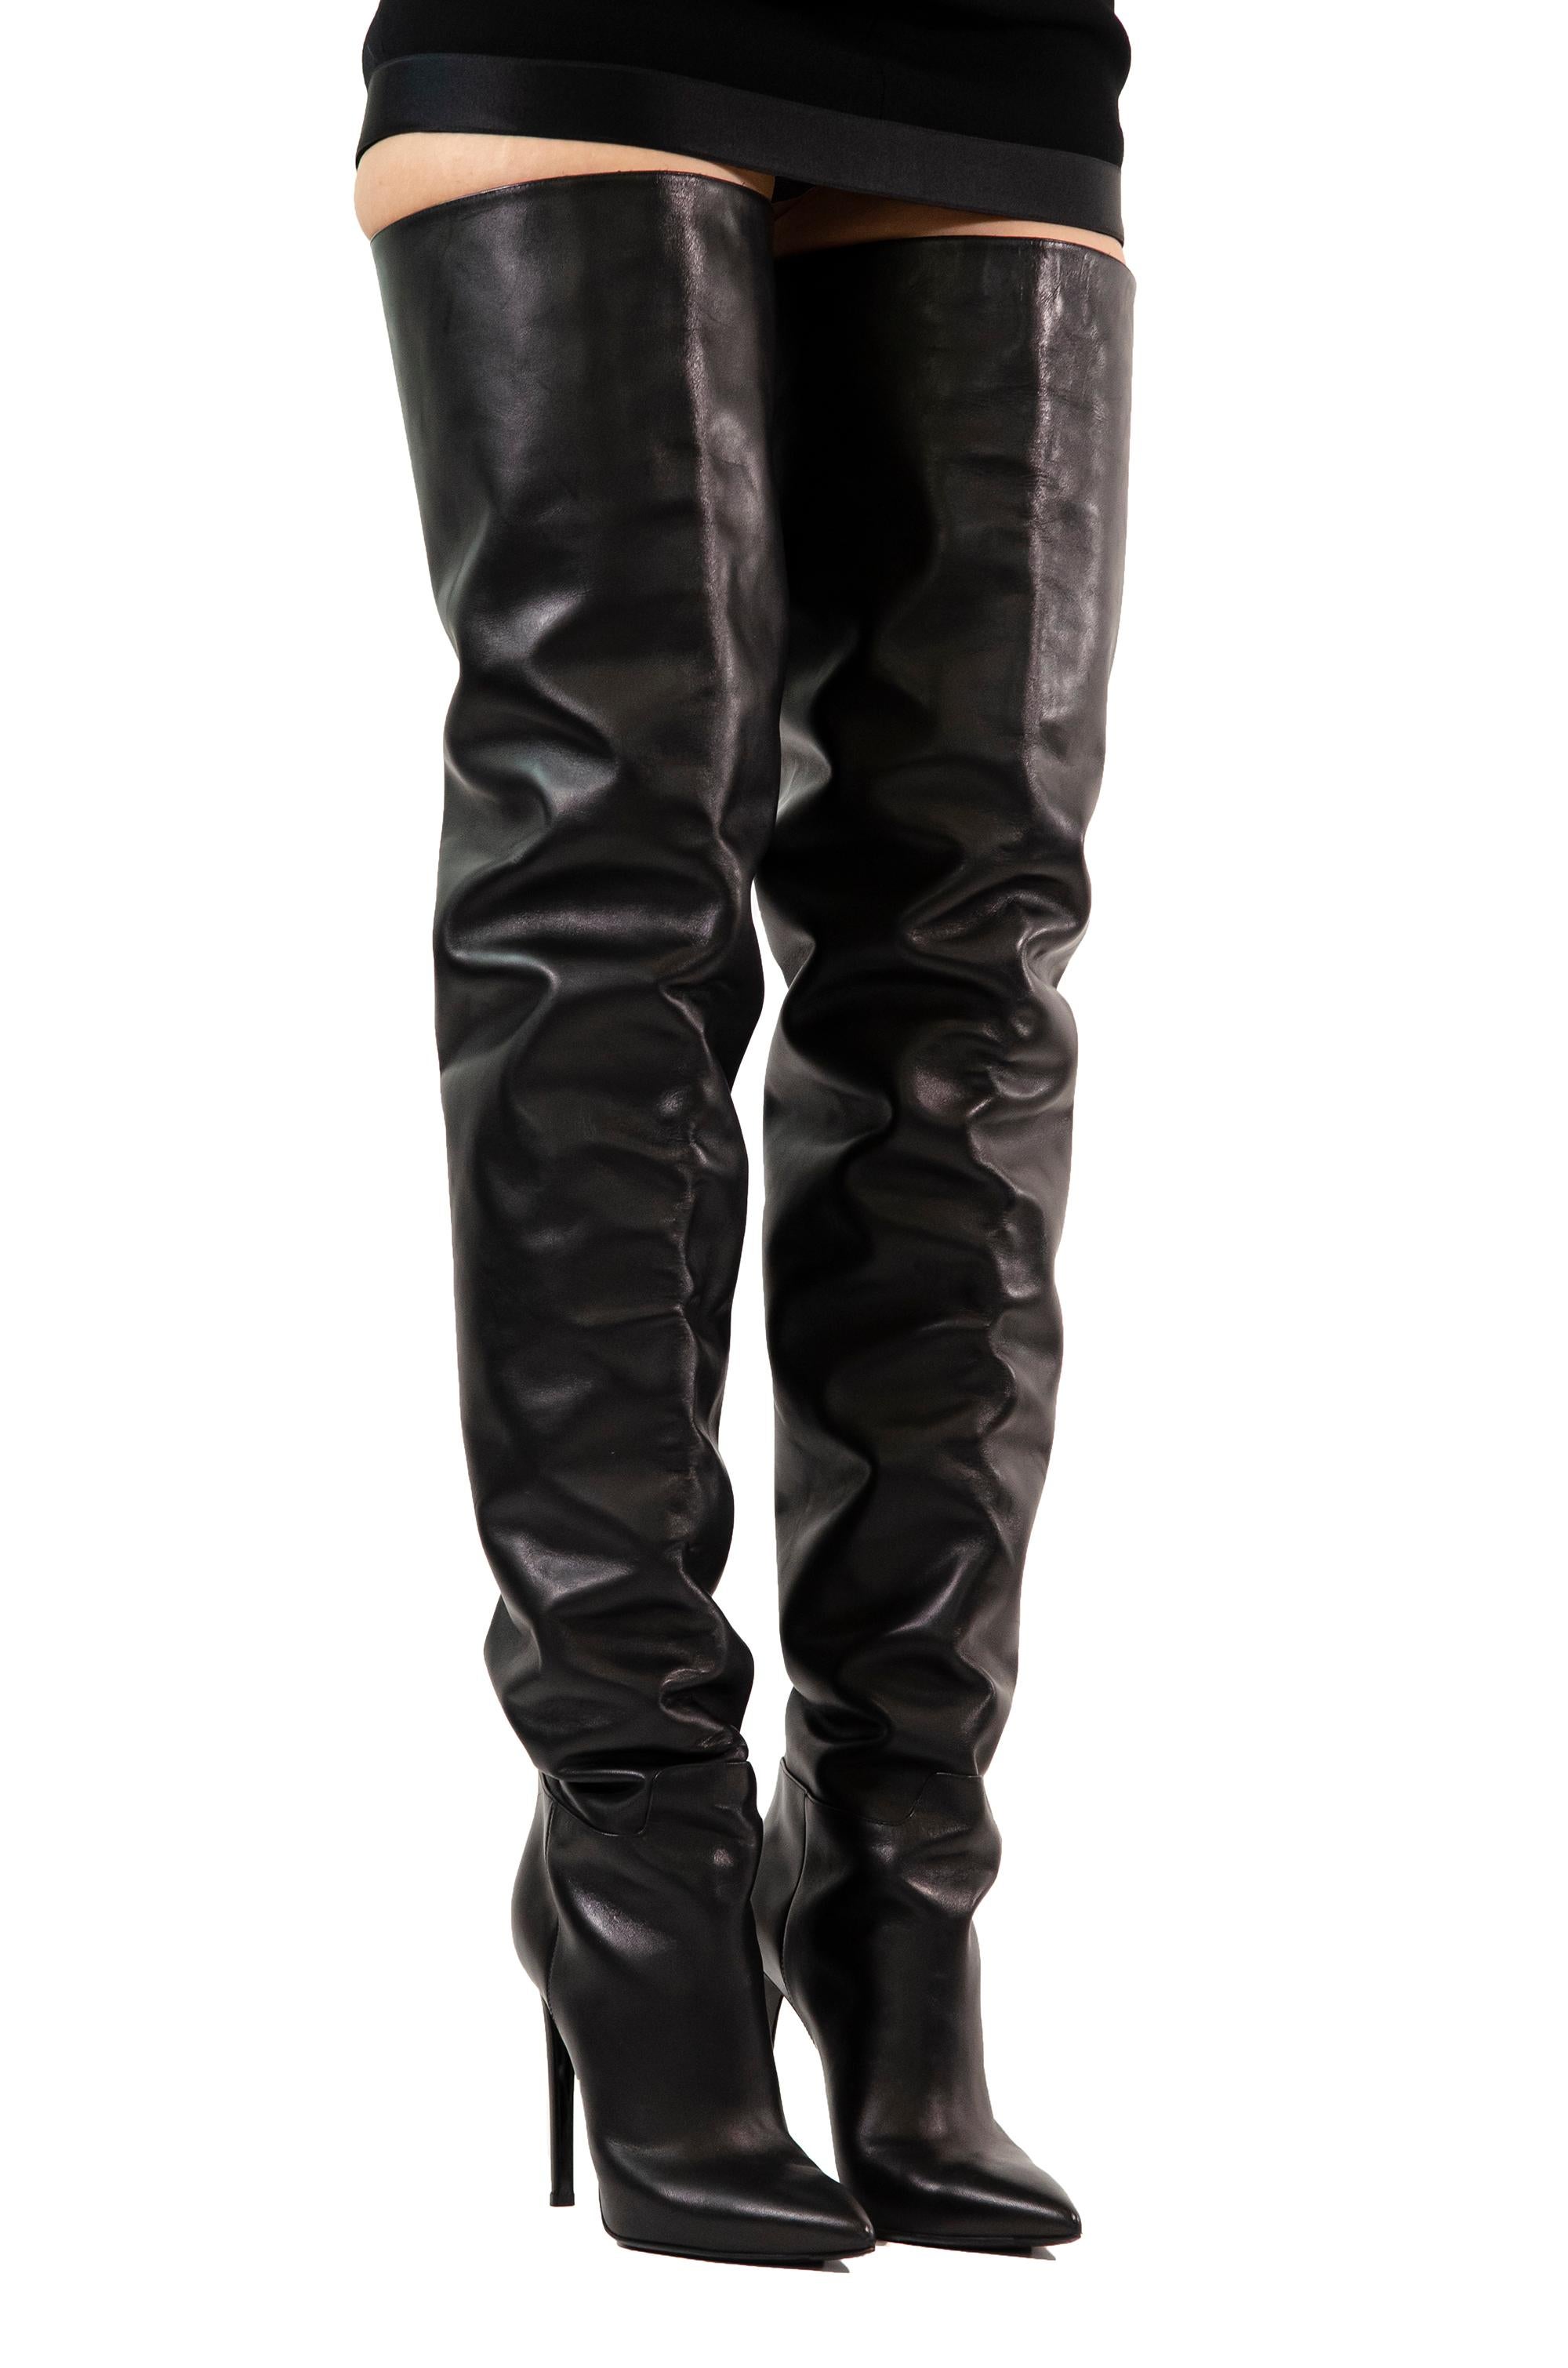 The most amazing Balenciaga thigh high boots from their Pre-Fall 2016 collection <3

Super rare “All Time’ Cuissarde thigh high boots. Insanely long, they cover your whole leg. These incredible dramatic black boots are made from a soft leather and